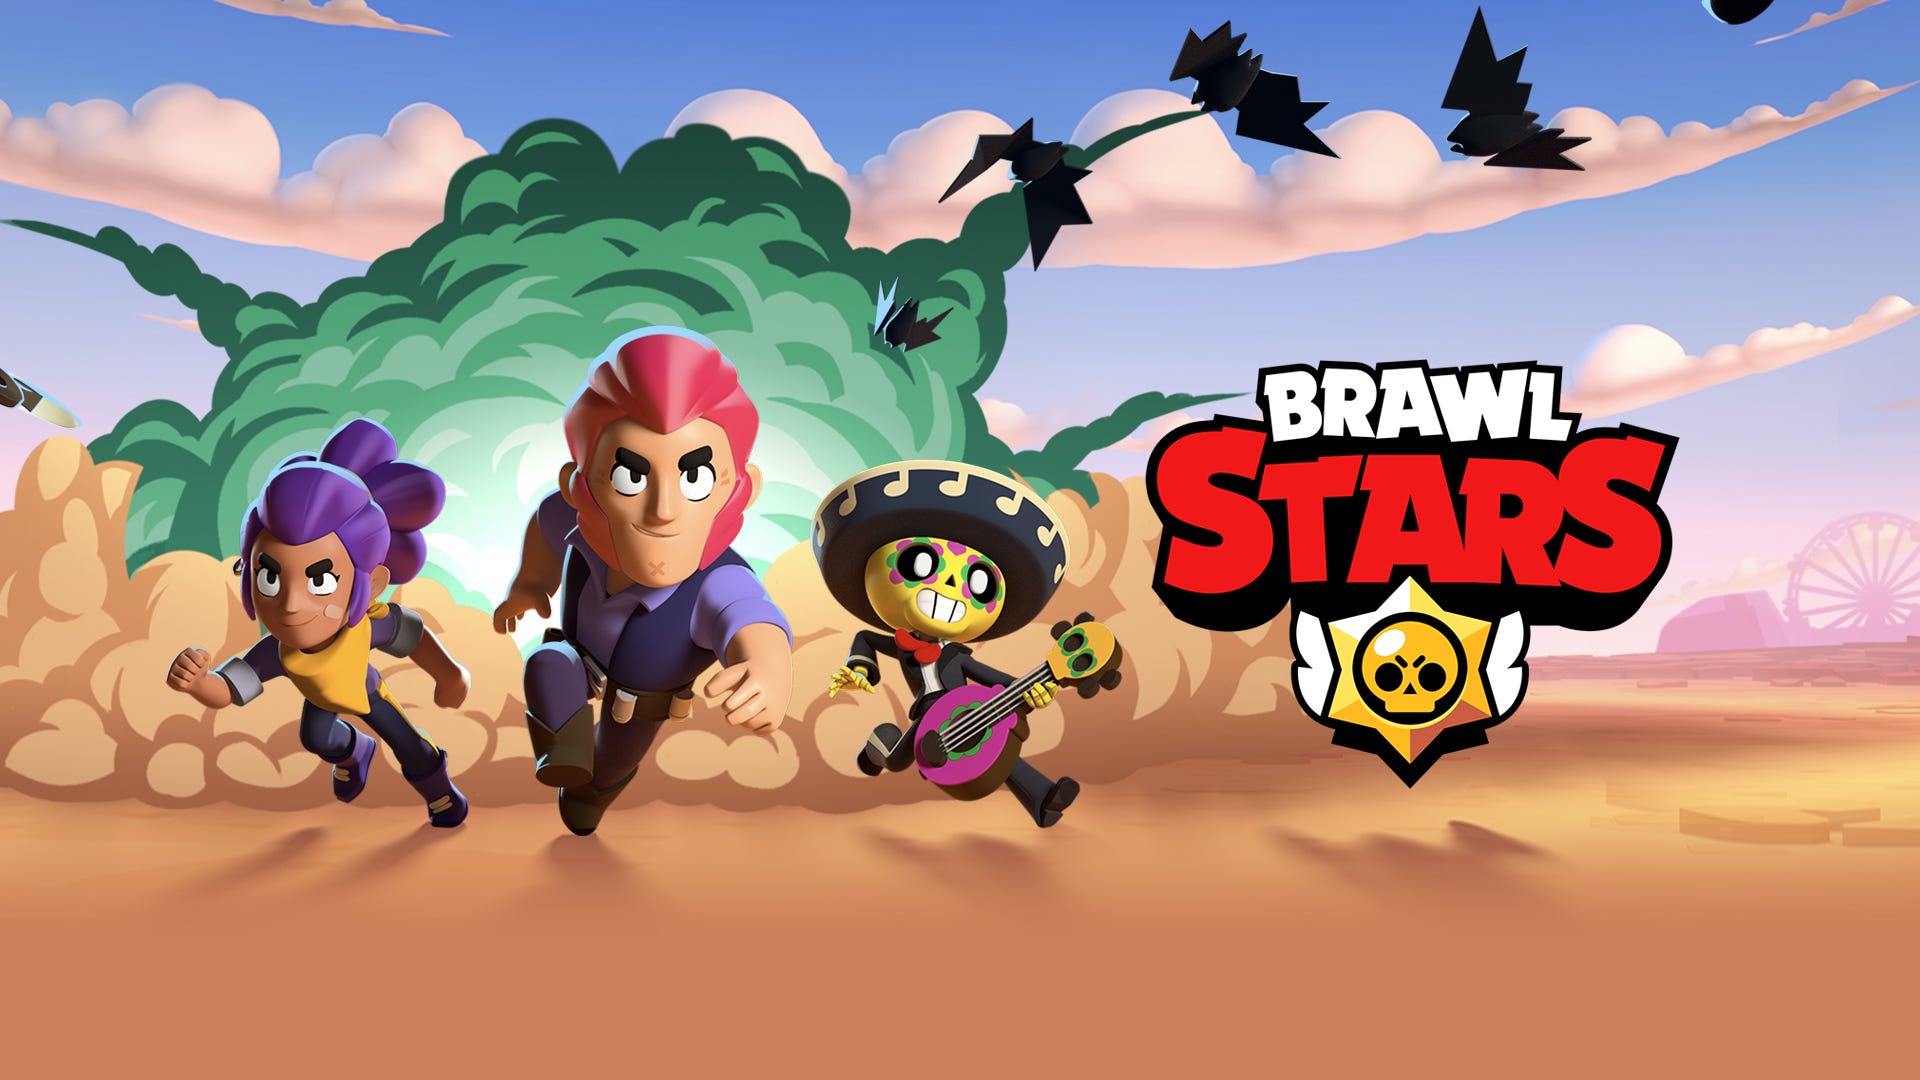 How to Vote in Brawl Stars World Finals Day 2